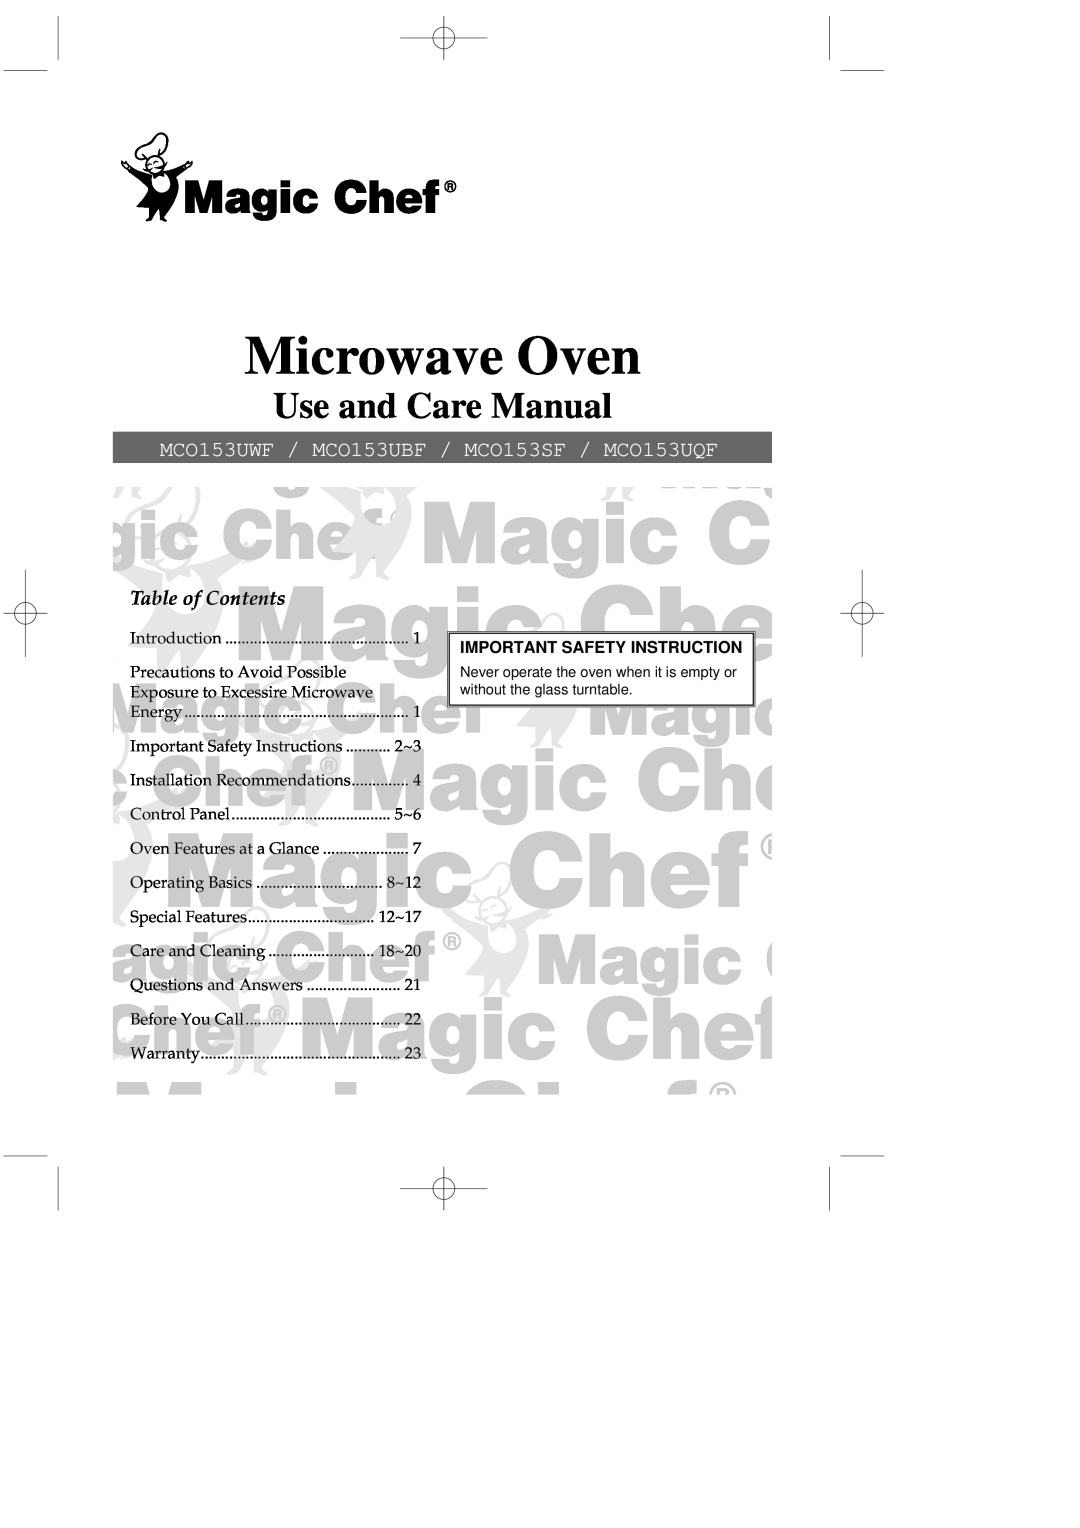 Magic Chef MCO153UQF, MCO153UWF important safety instructions Microwave Oven, Use and Care Manual, Table of Contents 